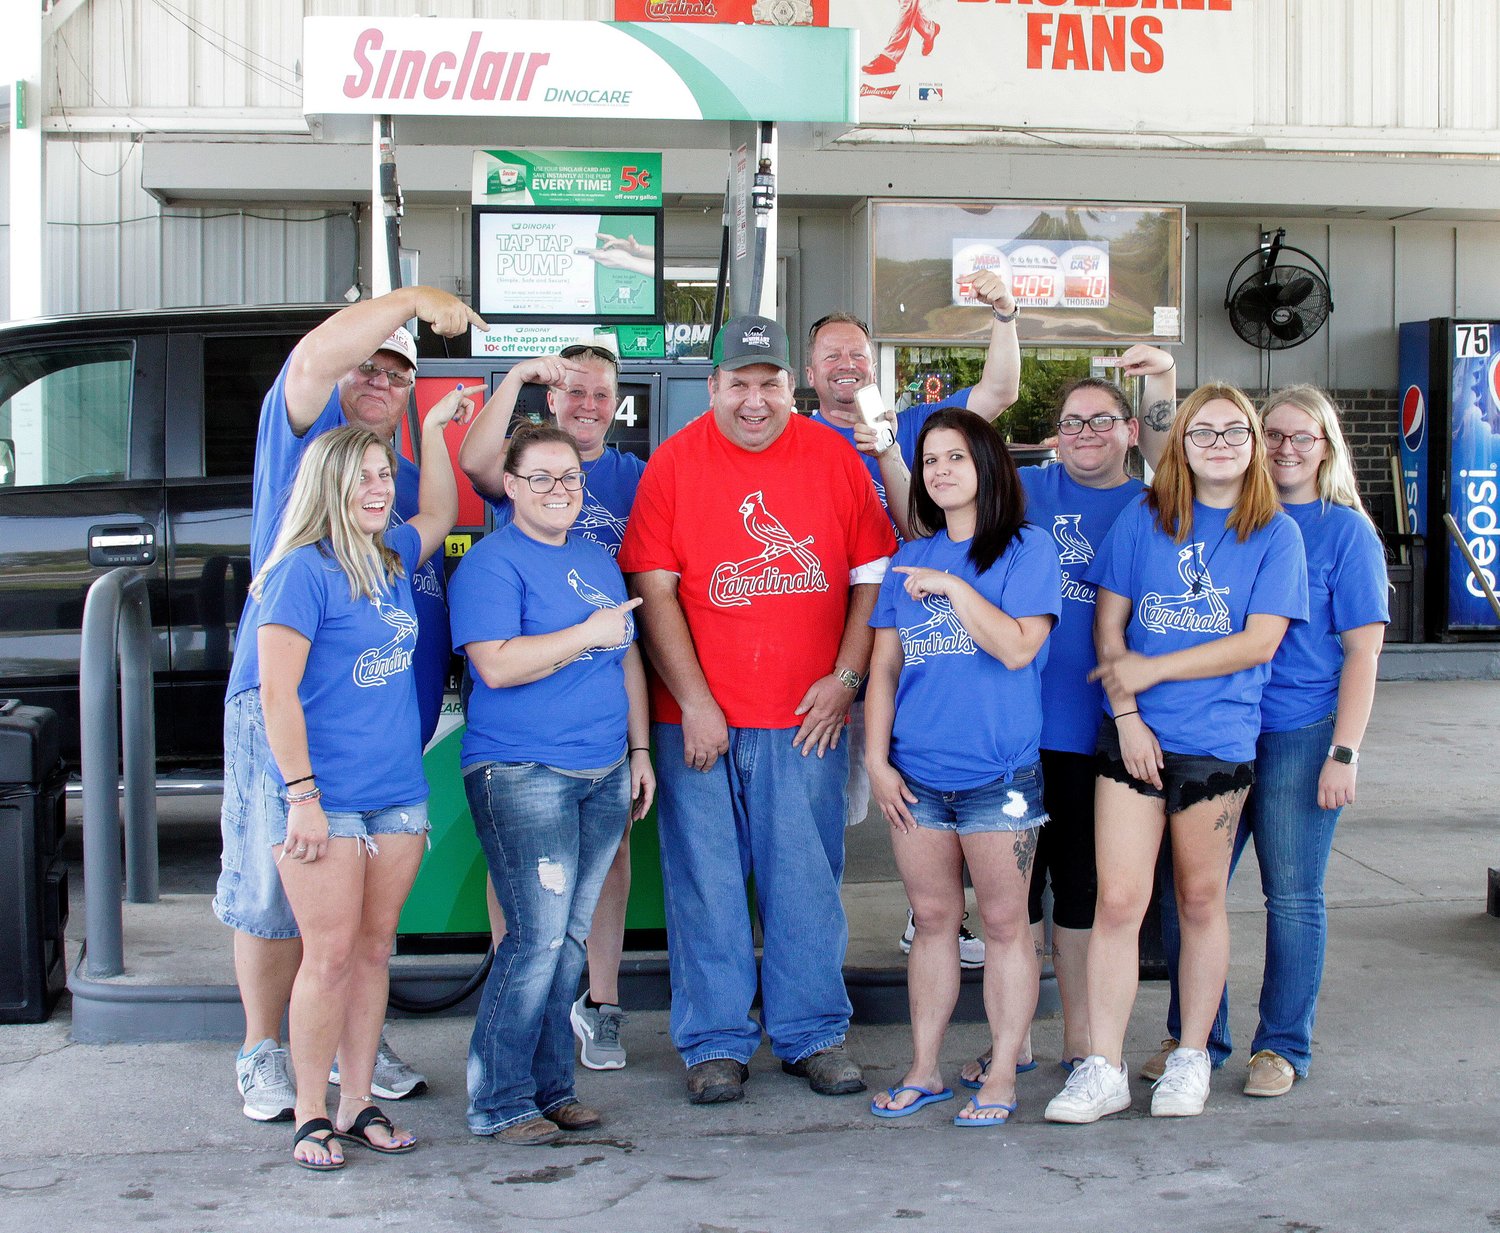 Dino Mart &amp; Dinowash of Moberly owner Rob Gillenwater and his employees held a surprise celebration on Sept. 10, 2021 in honor of Kevin Embree for his 35 years of service at this same gasoline convenience store location at 1634 State Hwy JJ. Embree arguably may hold a world record for being a full service gas attendant at the same business for more than three decades. Many of his customers were told in advance to stop by for a visit and receive a free hot dog lunch between 10 a.m. and 2 p.m. that Friday. Dino Mart employees shown are (first row) Keri Benner, Amanda Gunn, Kevin Embree (red shirt), Jerri Oliver and Lillie Harville. (Second row) Van Benner, Jess Spotts, Dino Mart owner Rob Gillenwater, Nickie Little and Erin Little.